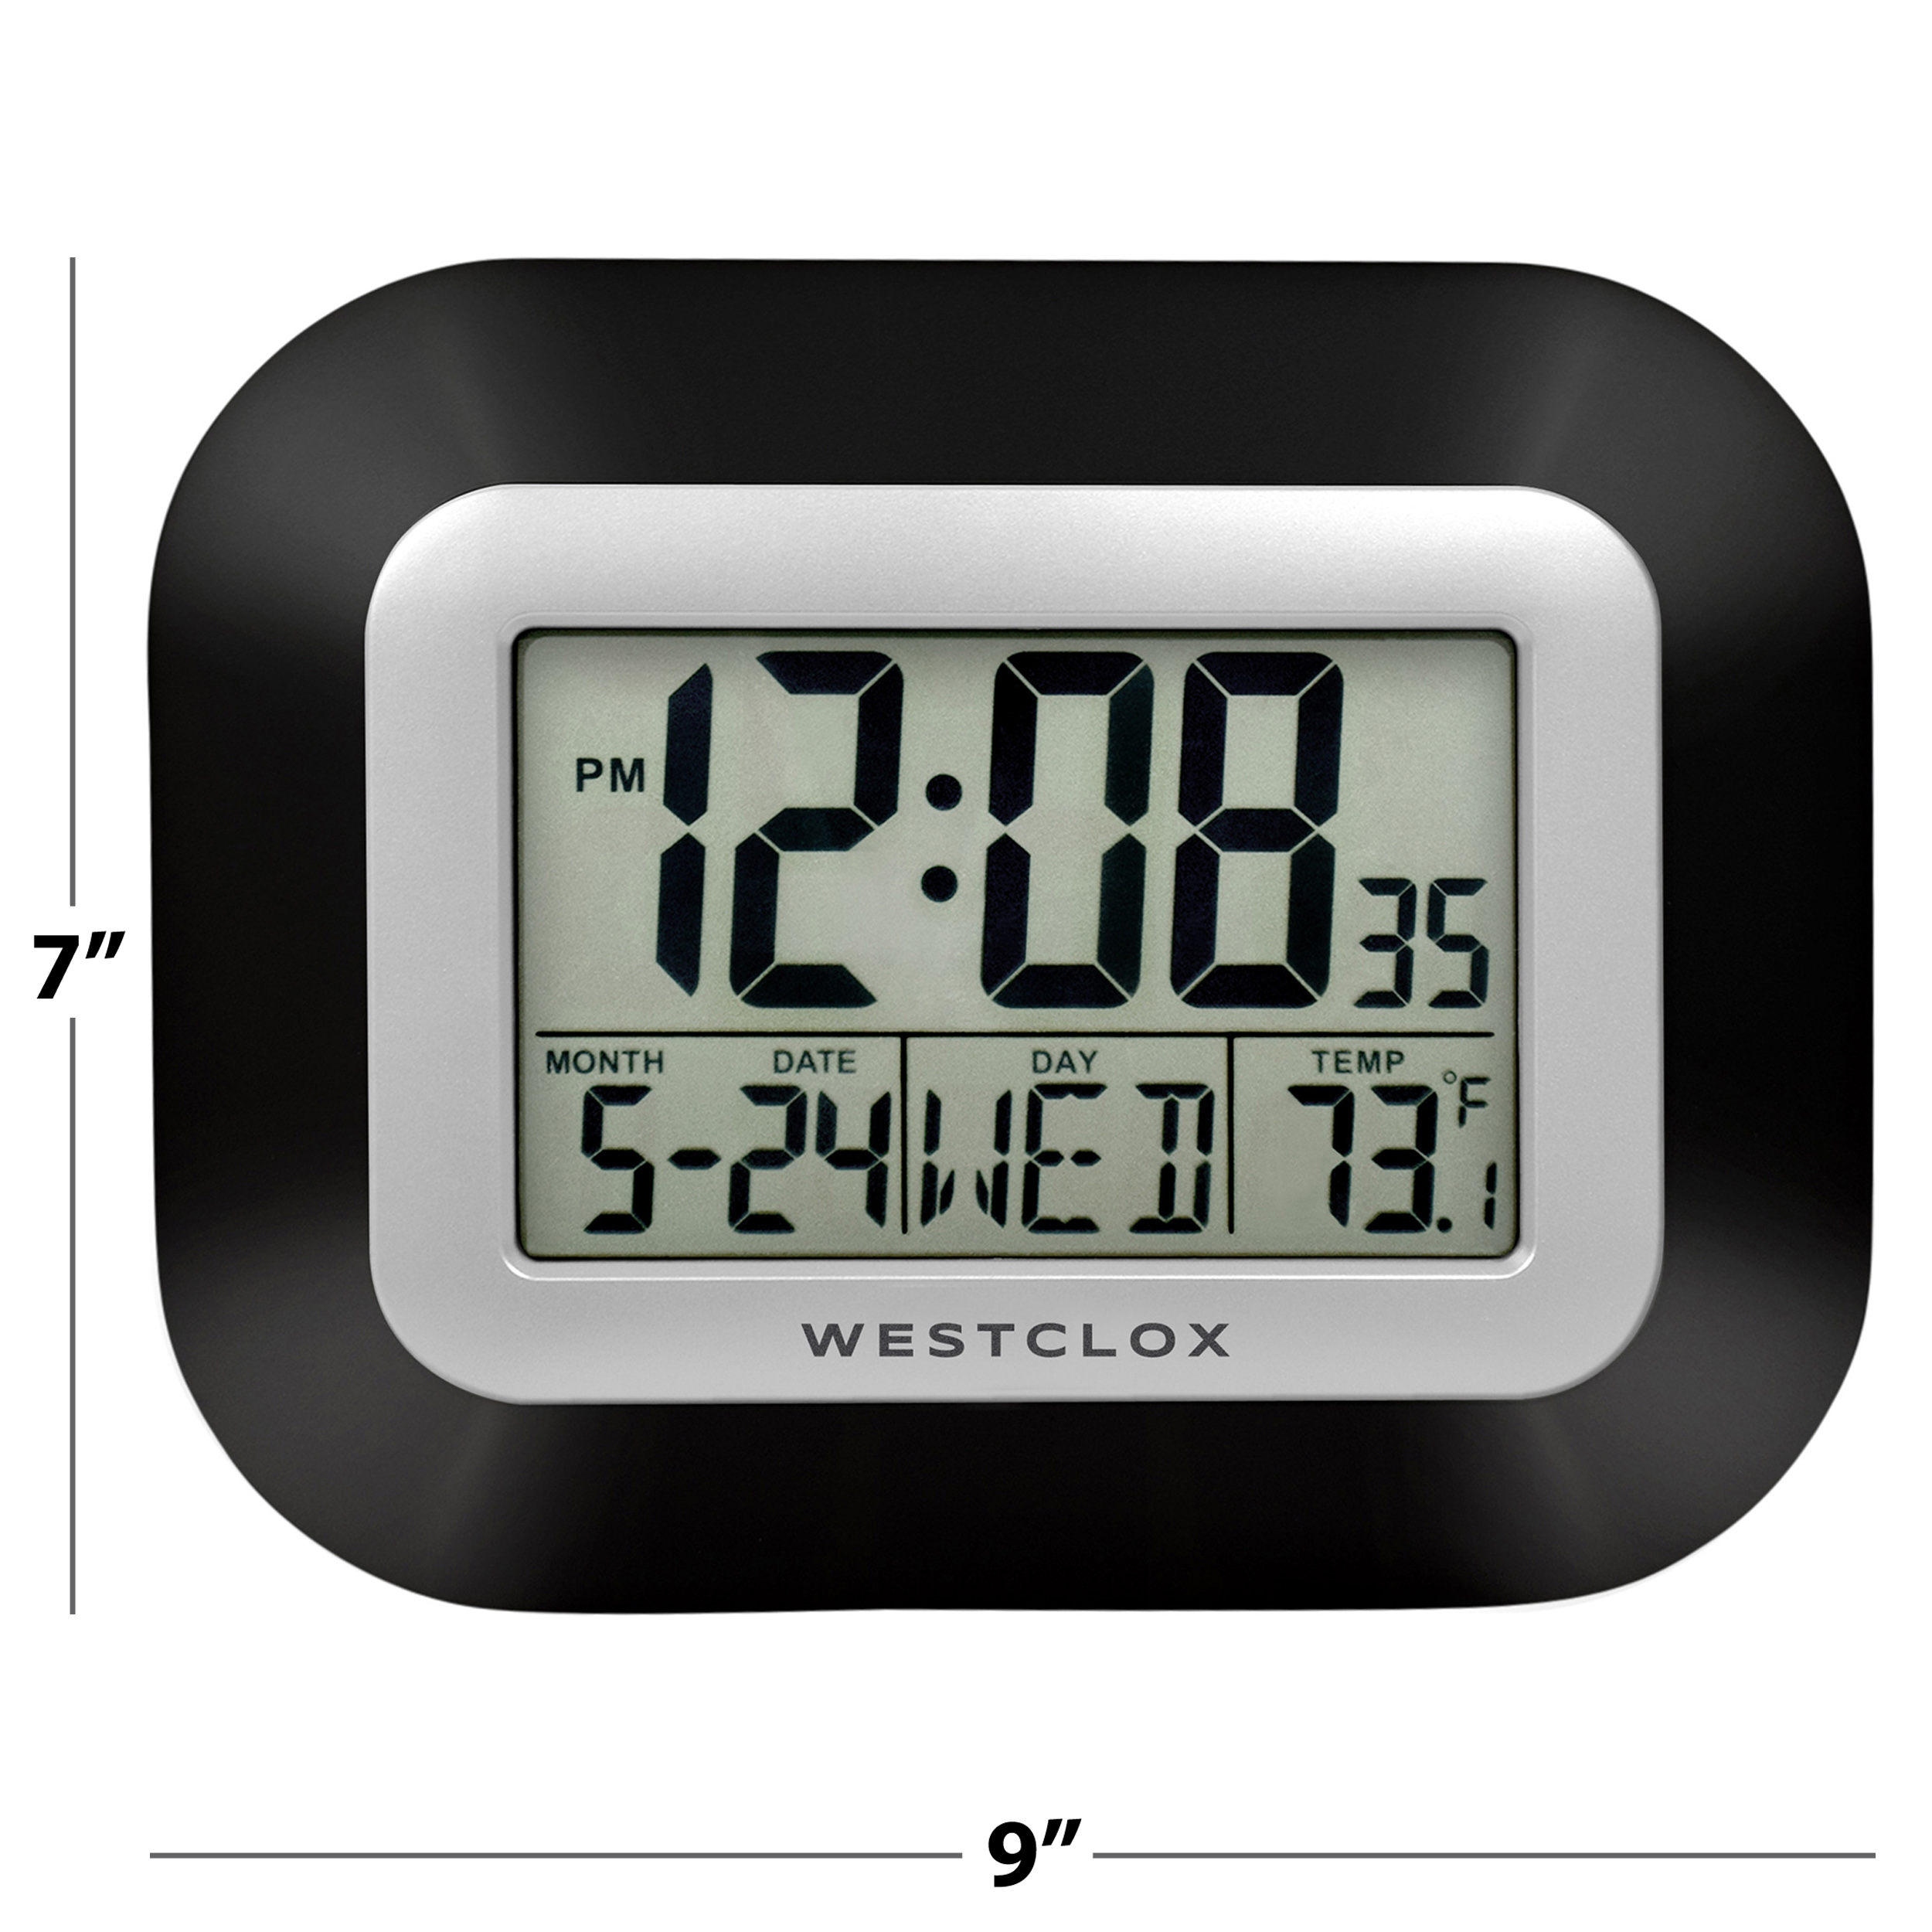 Westclox Classic Black Digital LCD Wall Clock with Date, Day and Temperature - image 3 of 6